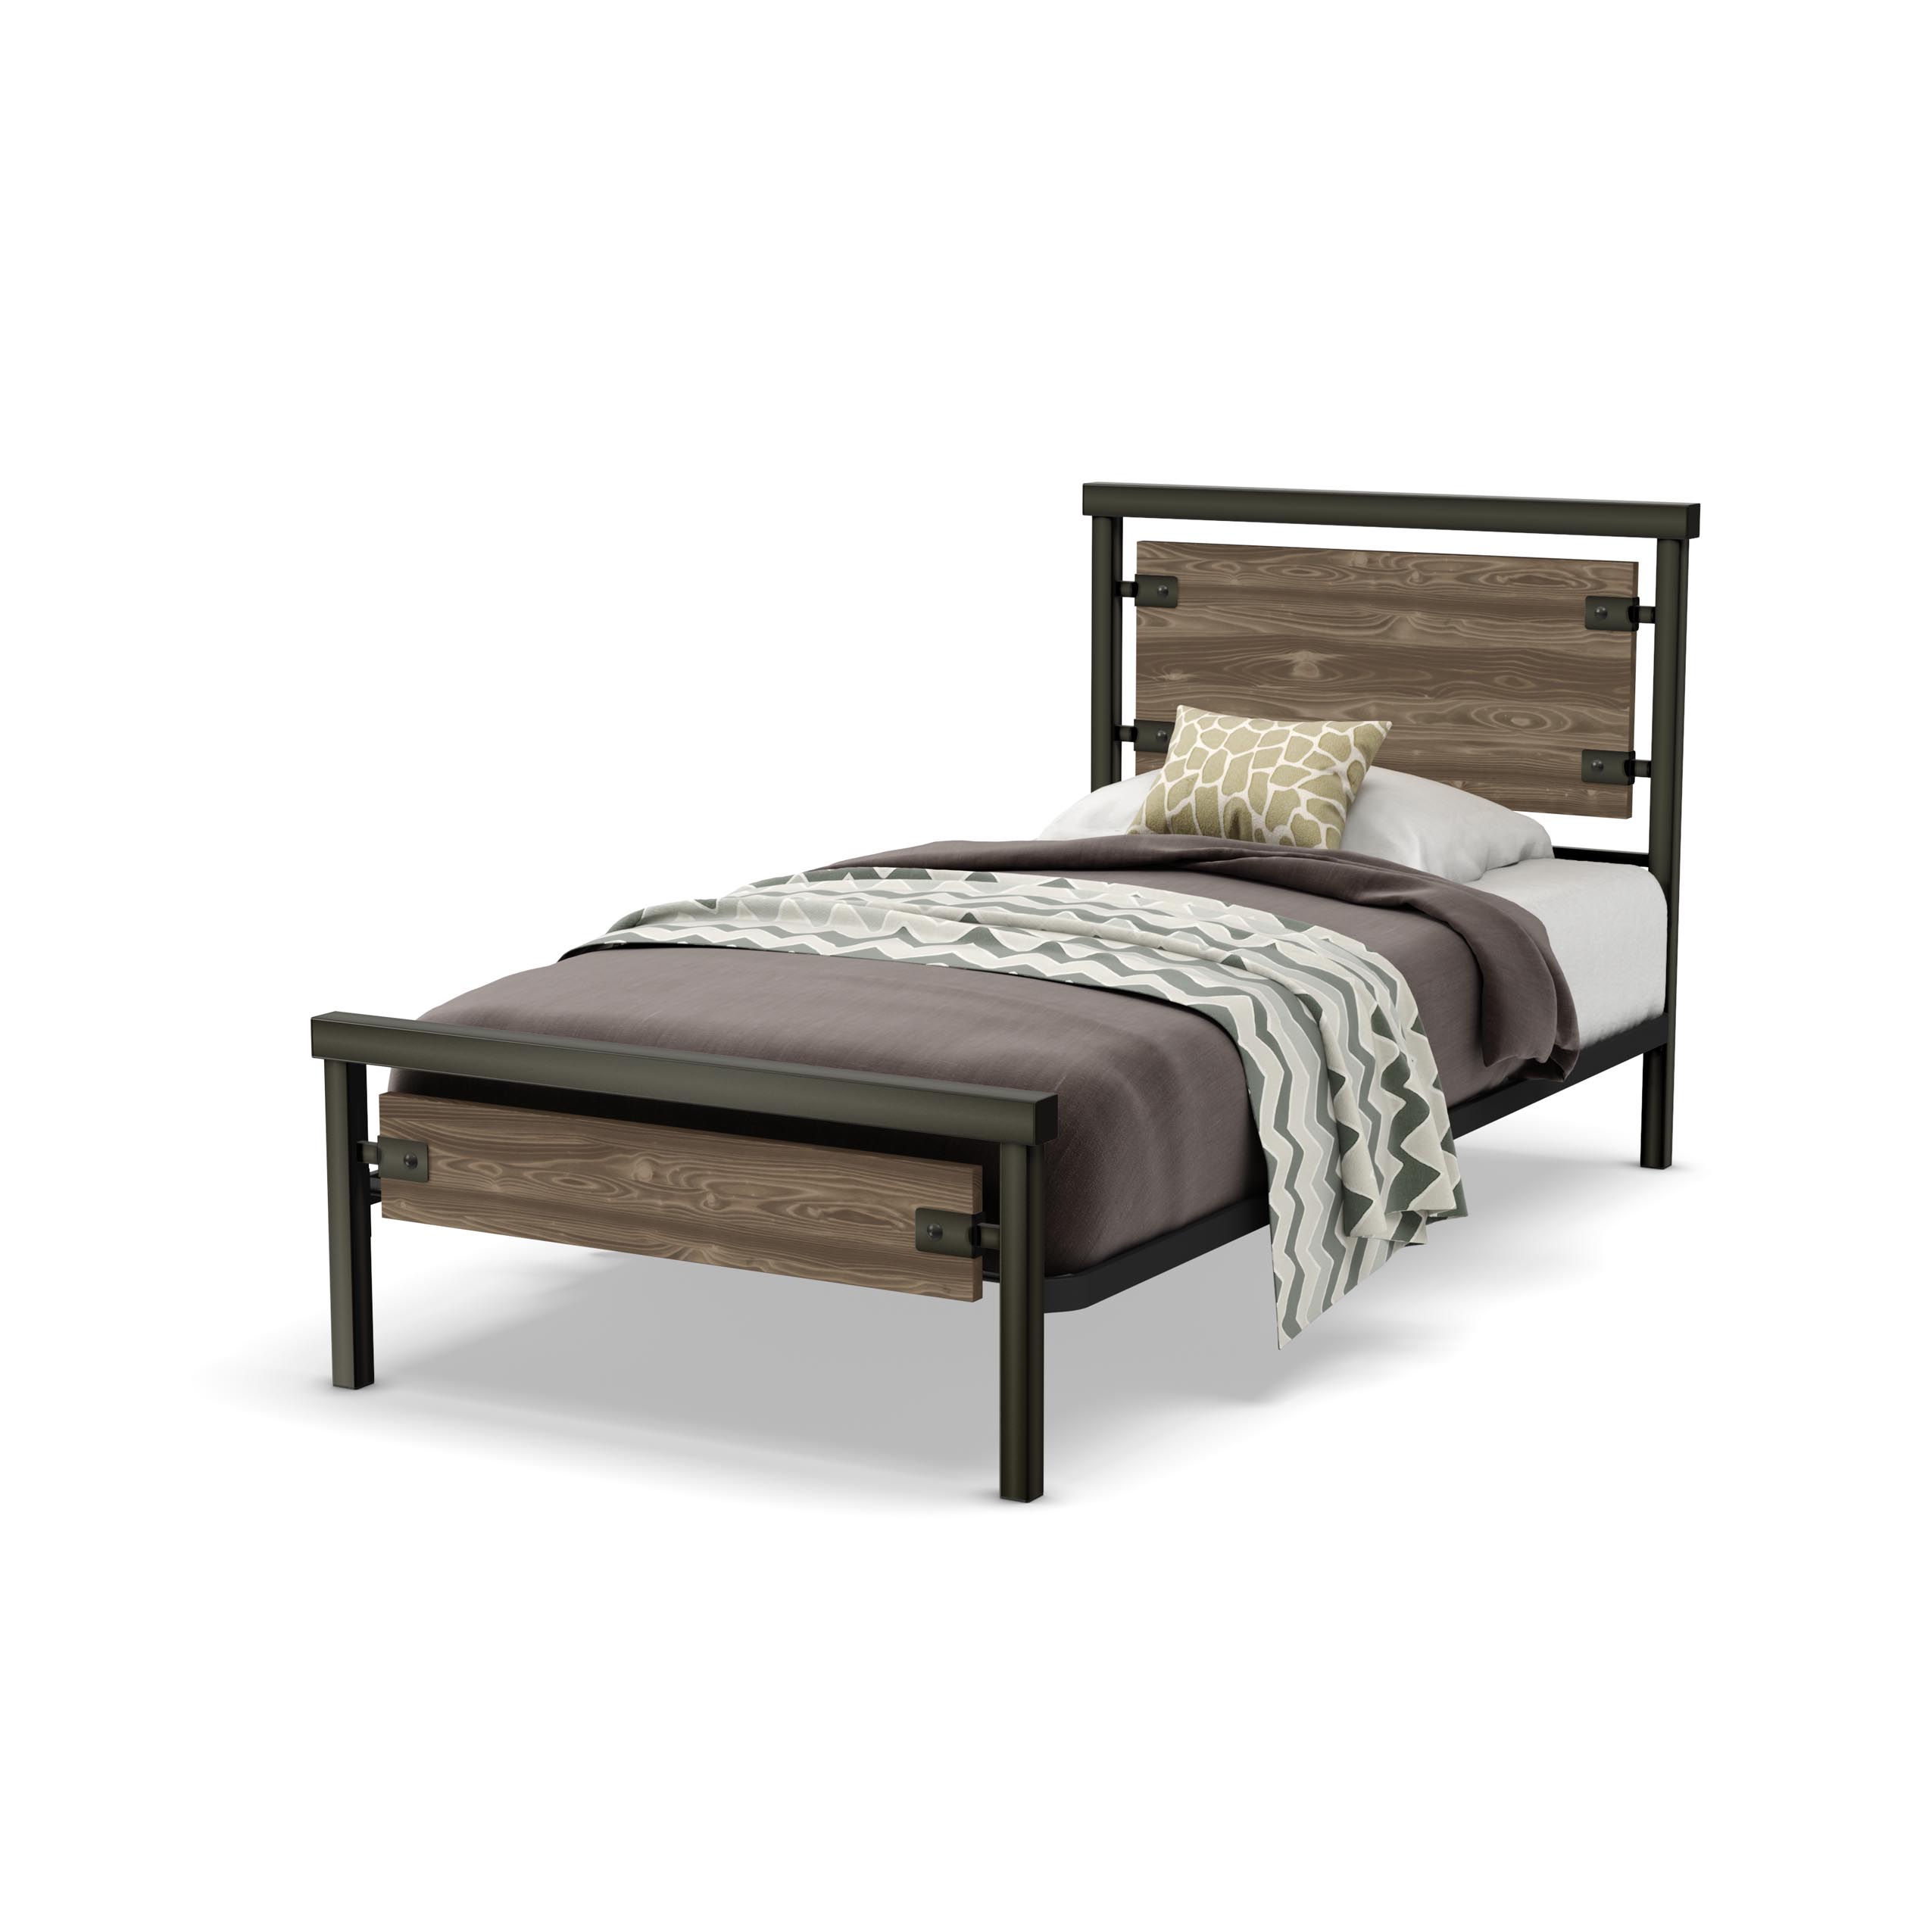 Factory Bed by Amsico